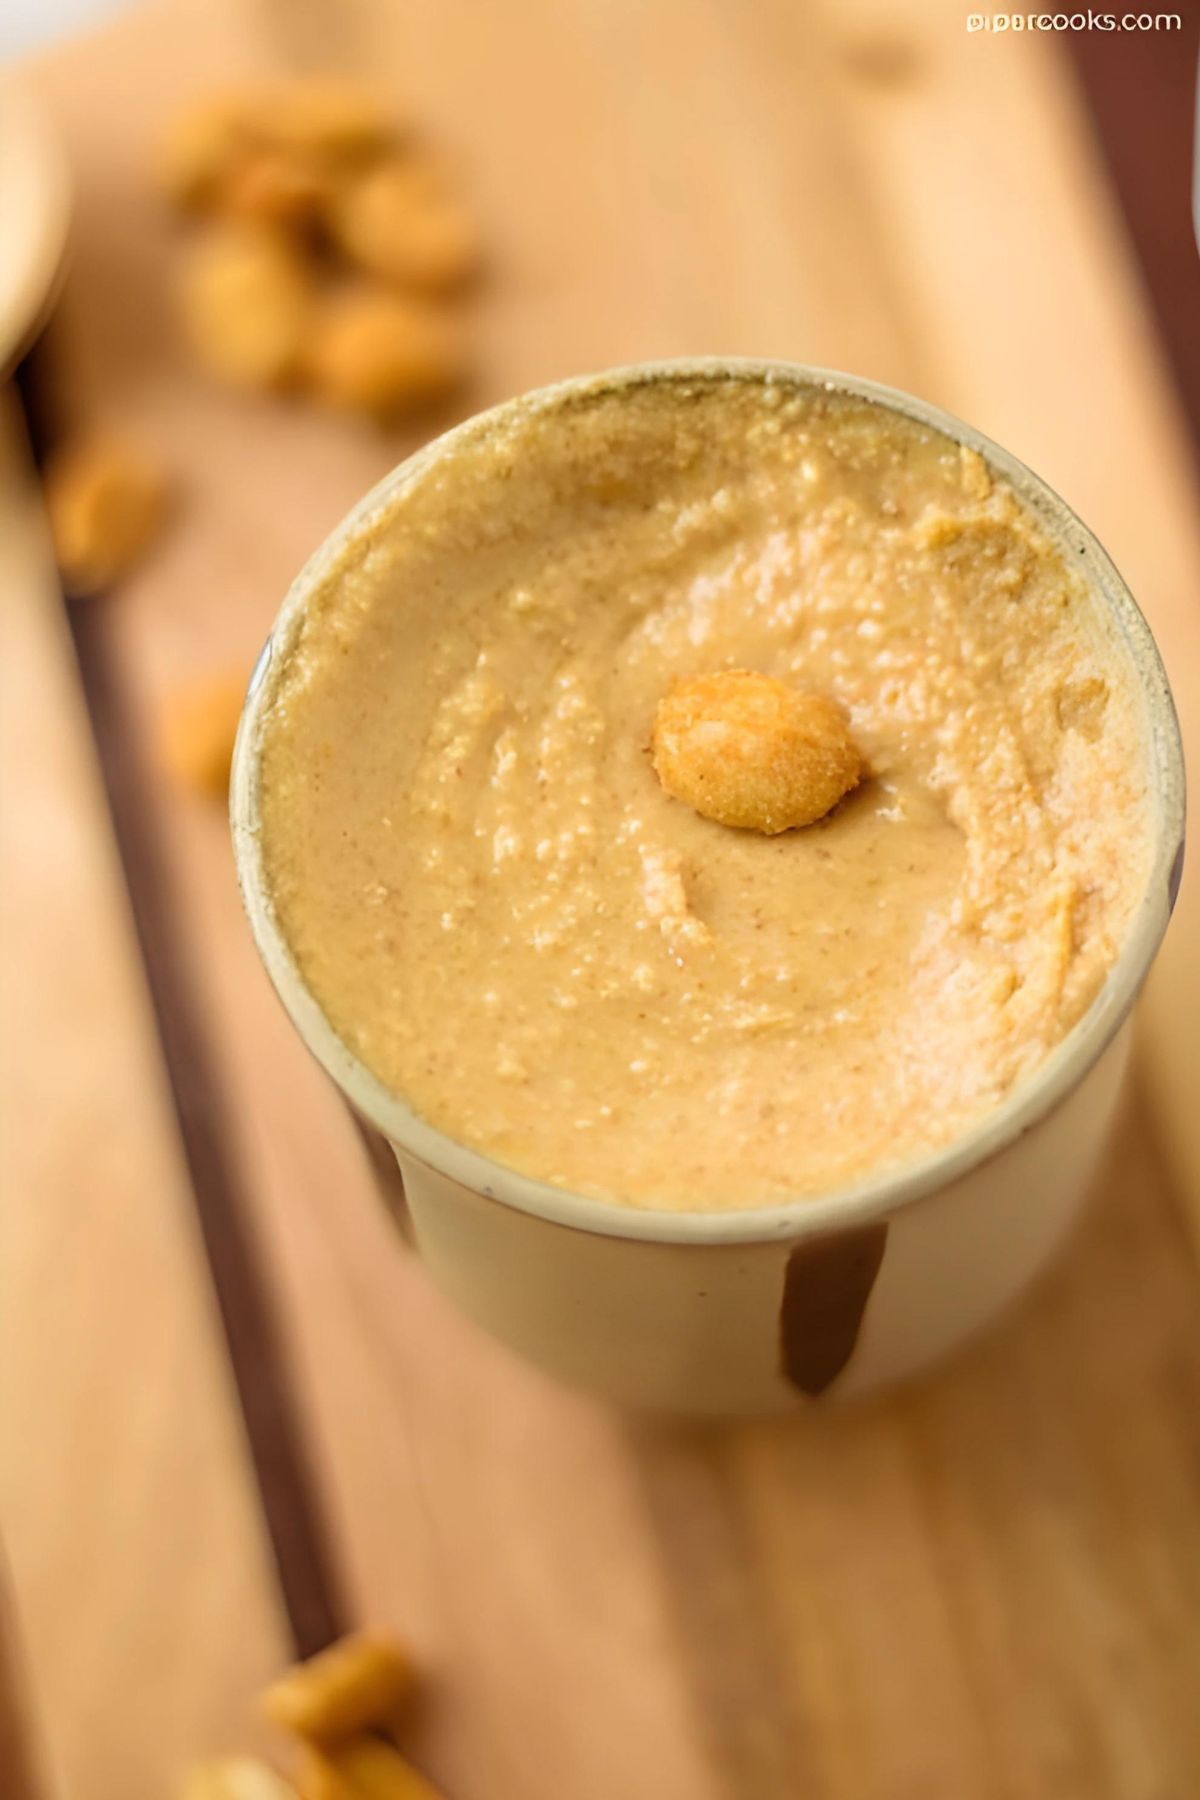 Honey Roasted Peanut Butter in a cup